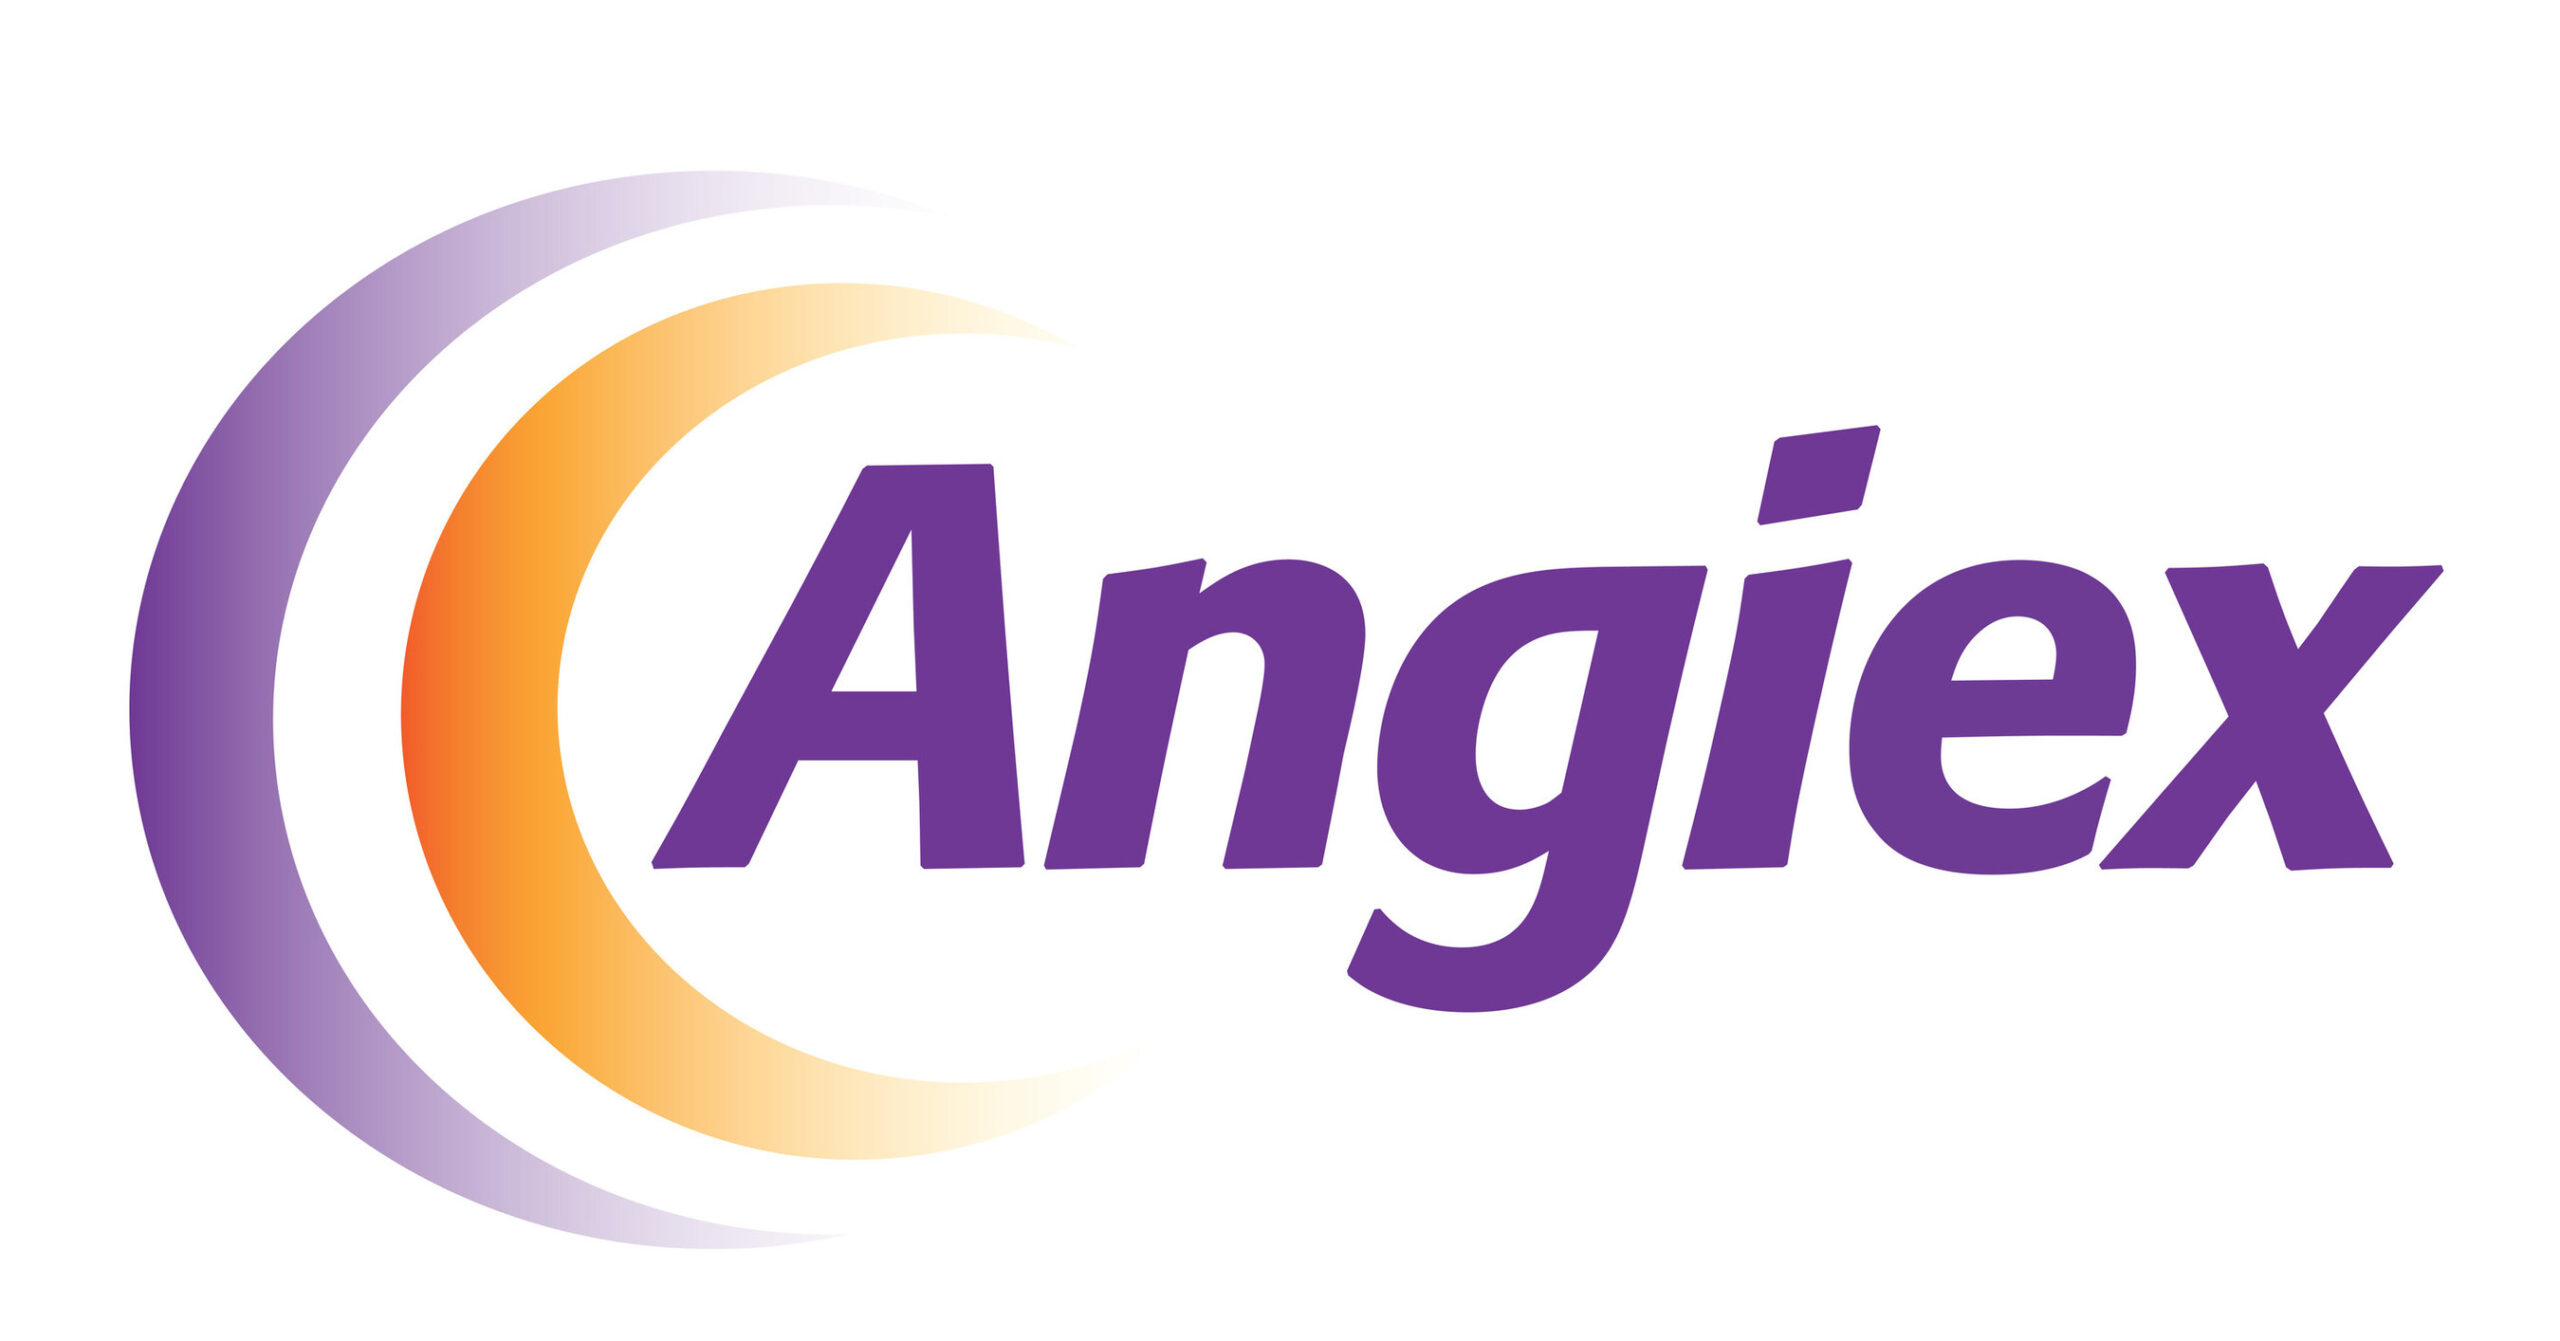 Angiex Inc. is a privately held biotech startup whose mission is to exploit newly discovered biological transport mechanisms to make drugs with revolutionary power over cancer. Based in Cambridge, Mass., Angiex was founded by a scientific team of leading experts in angiogenesis, vascular biology, and oncology.